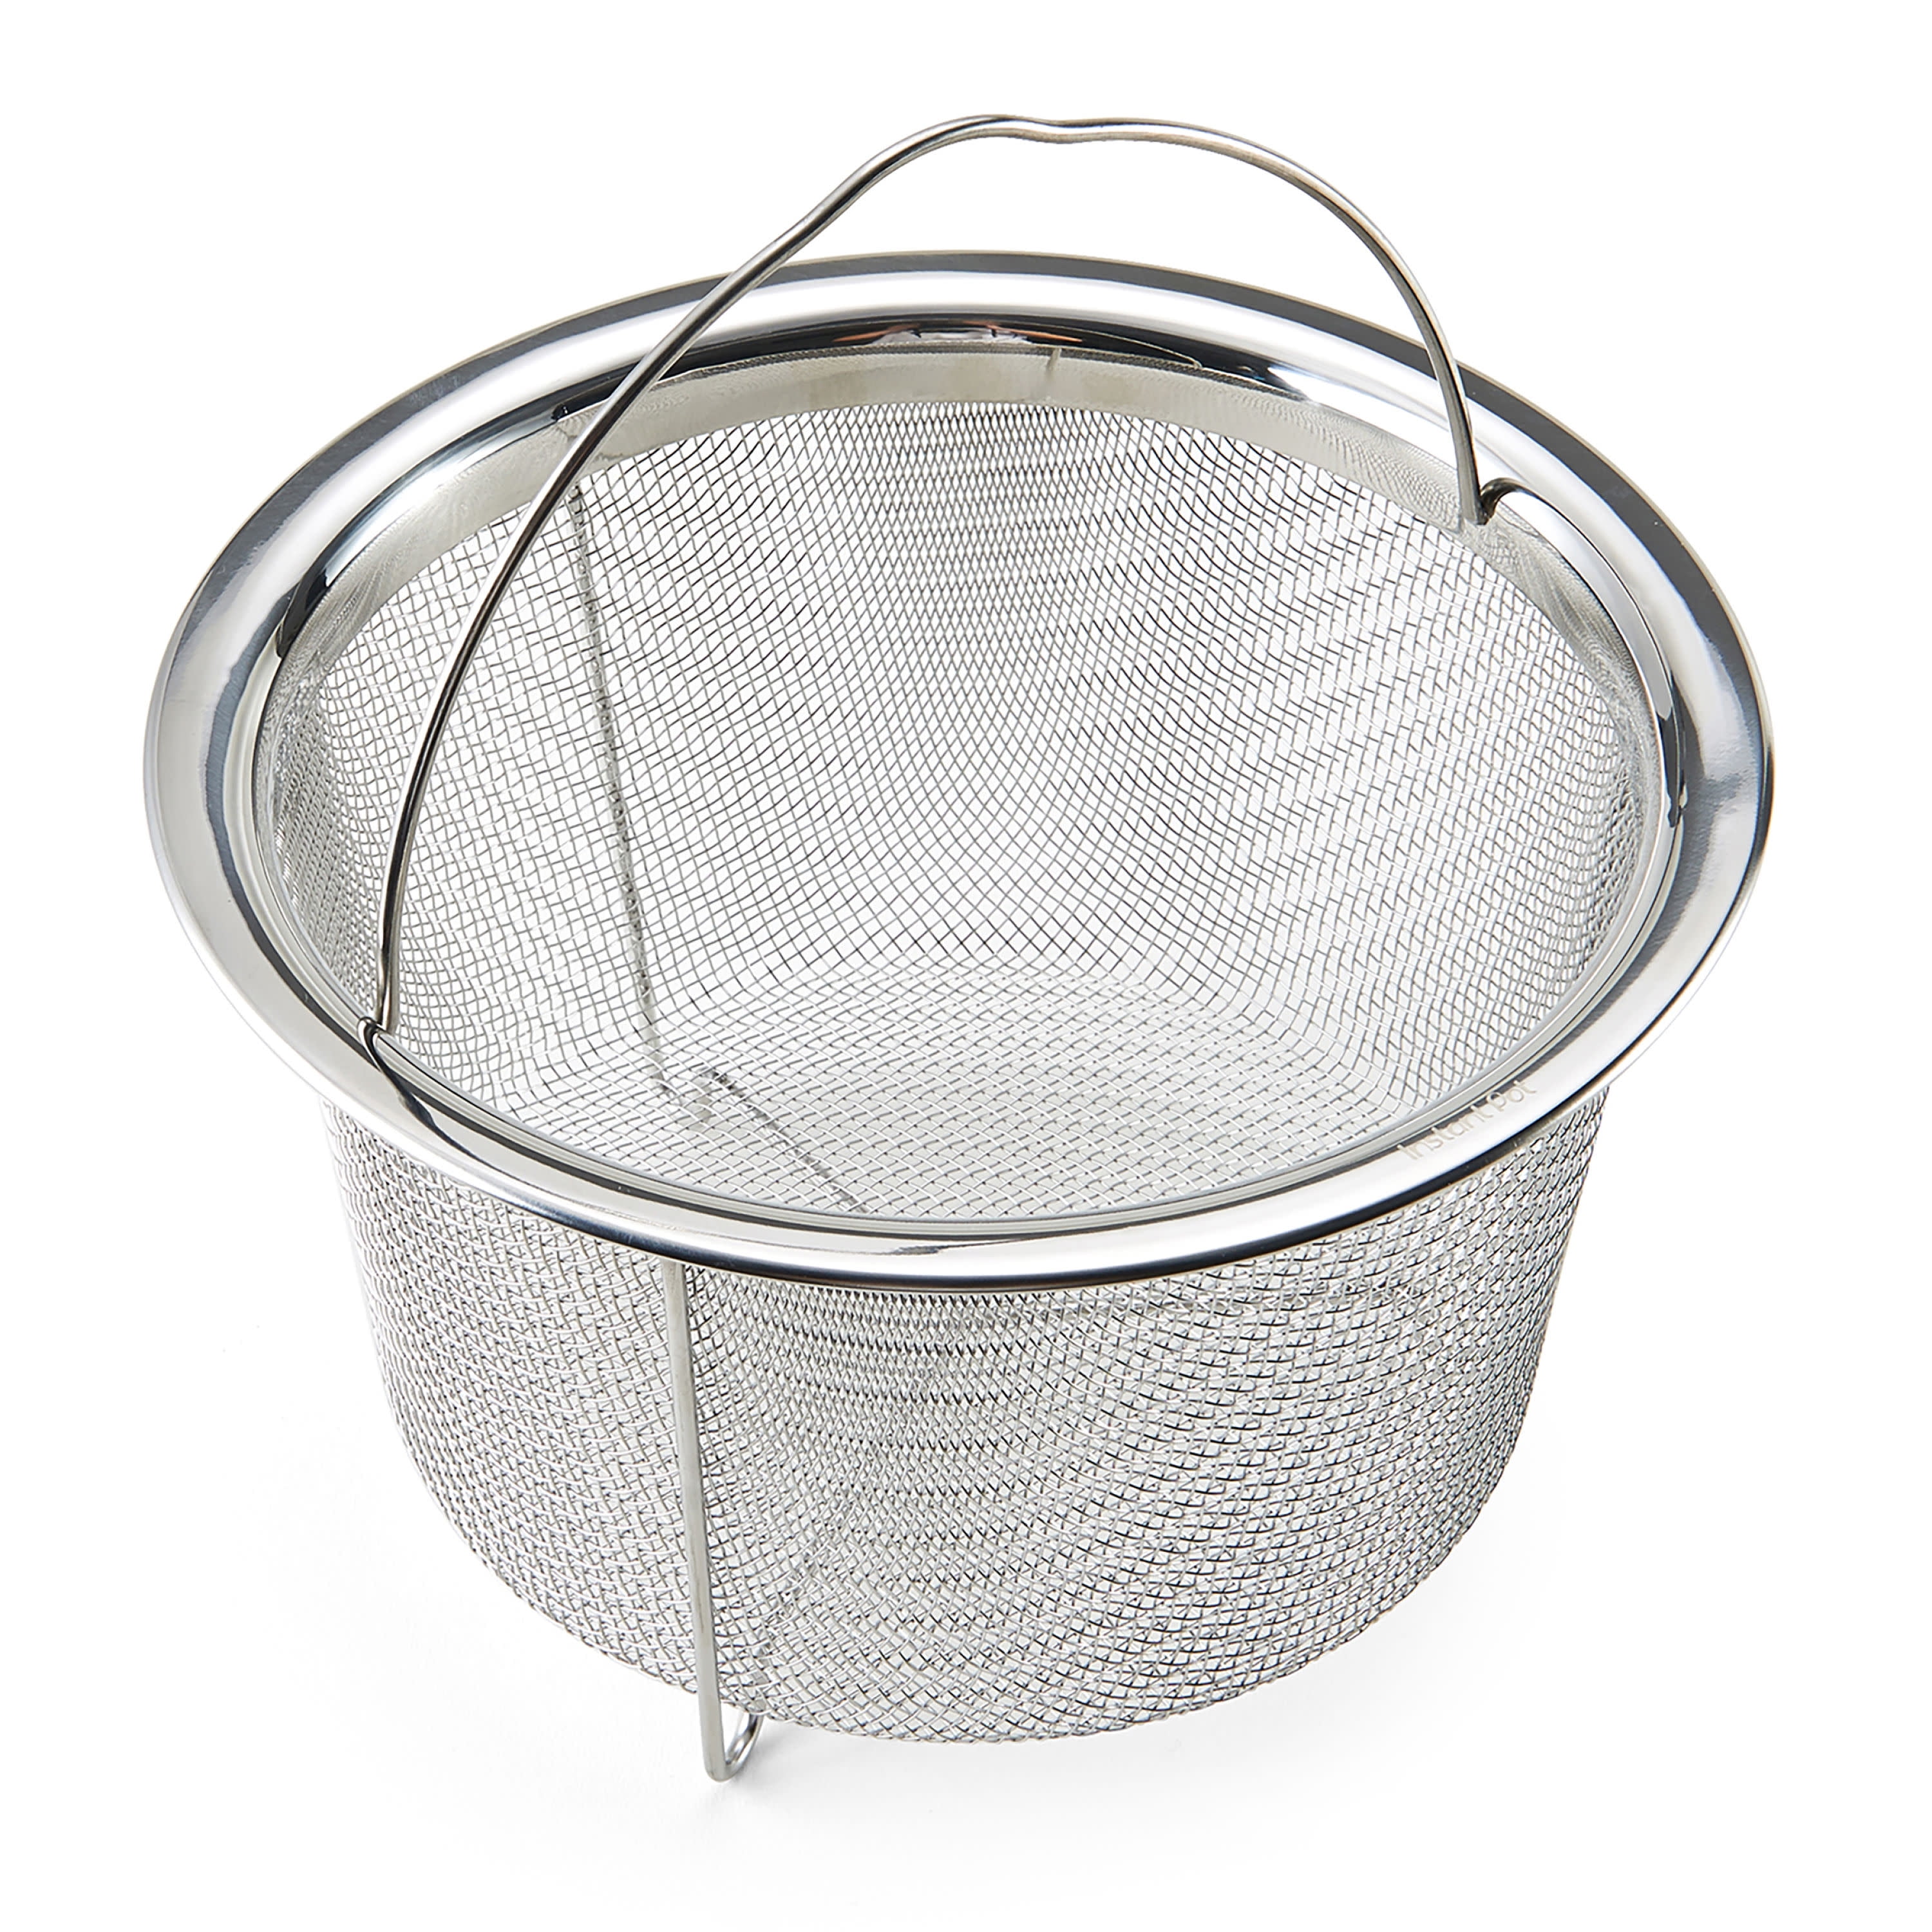 Instant Pot Official Mesh Steamer Baskets - Set of 2, Small and